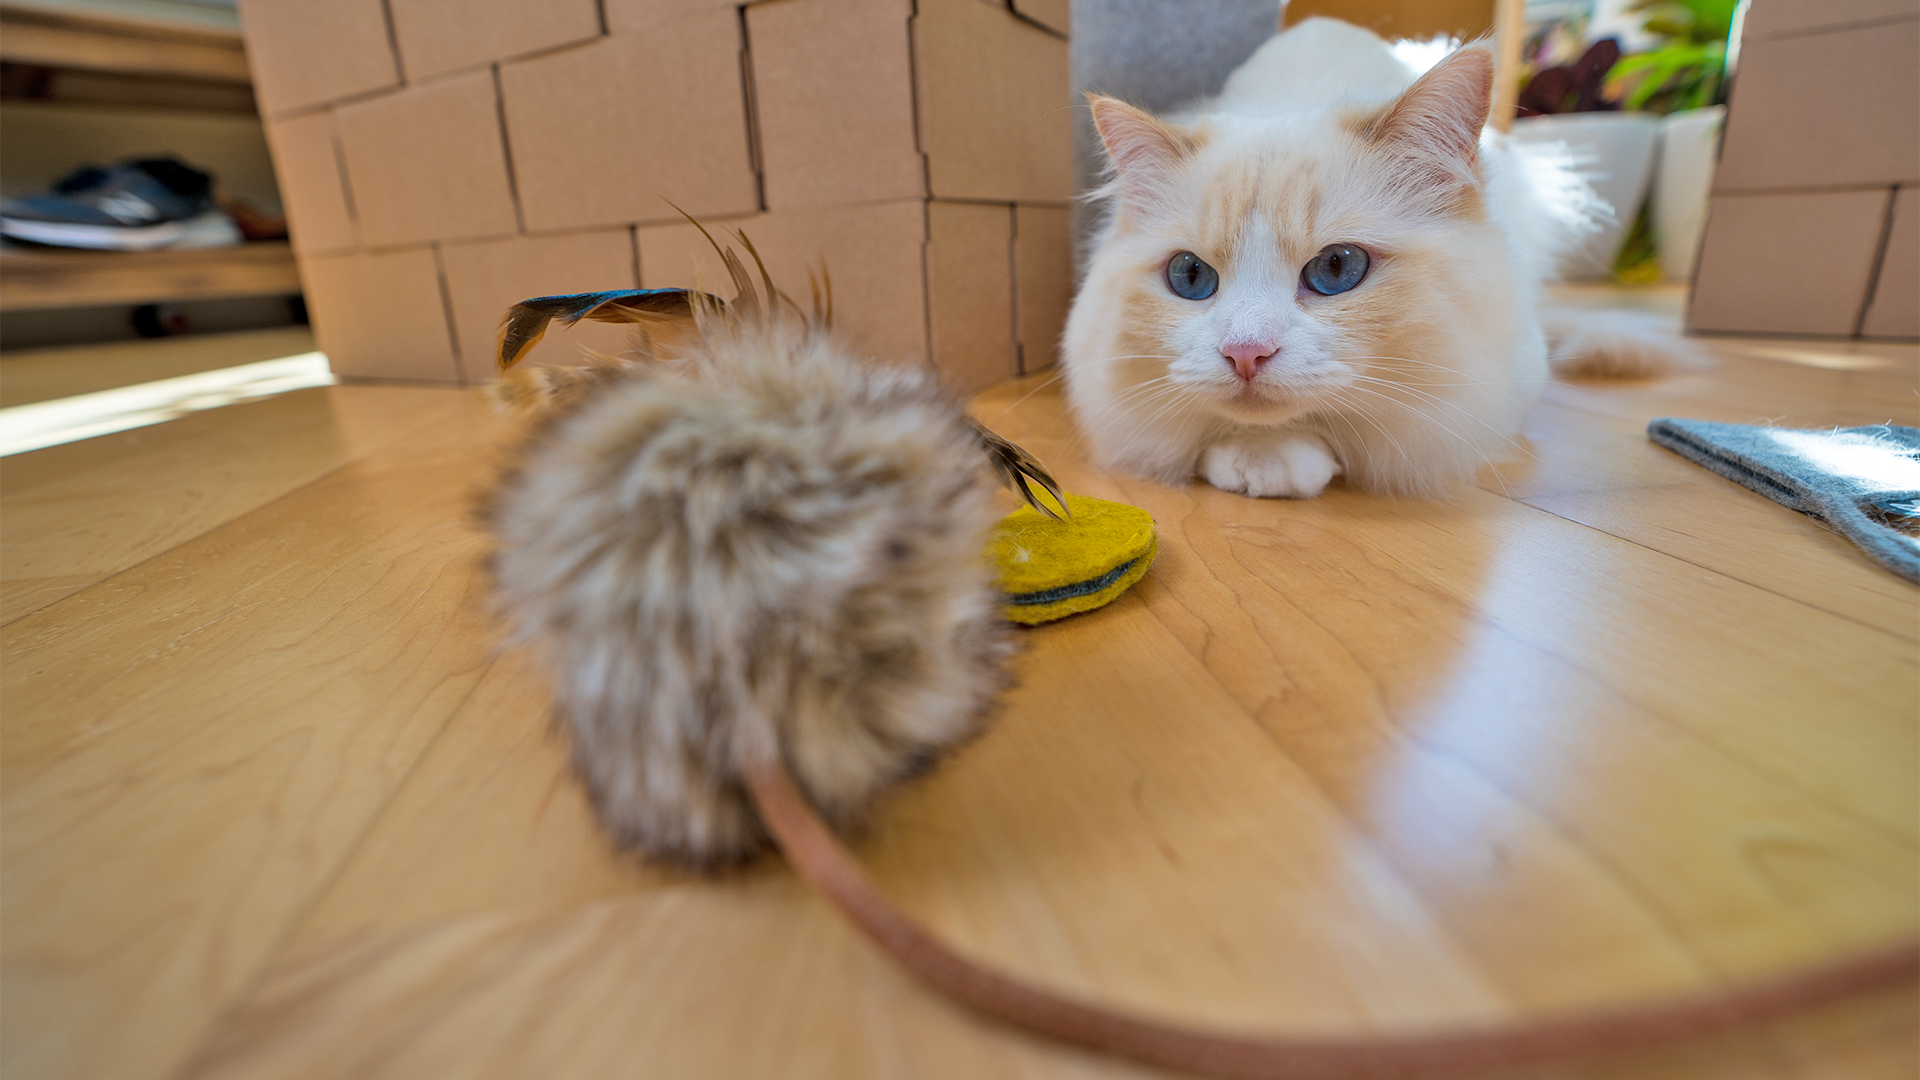 From Bored to Blissful: How Cat Toys Can Enrich Your Feline